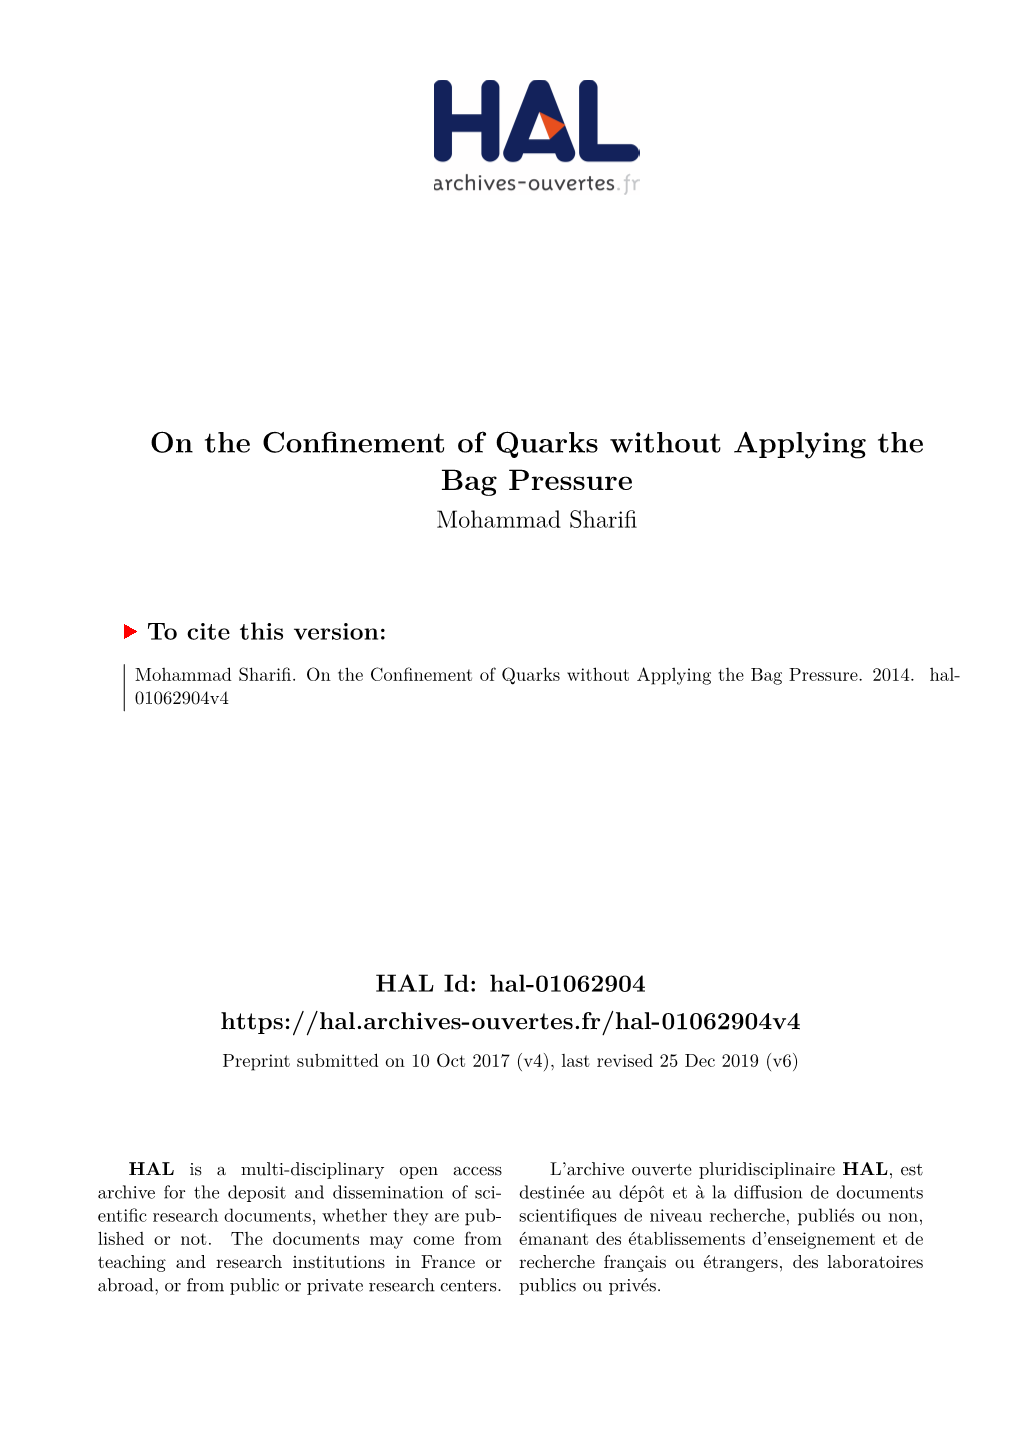 On the Confinement of Quarks Without Applying the Bag Pressure Mohammad Sharifi